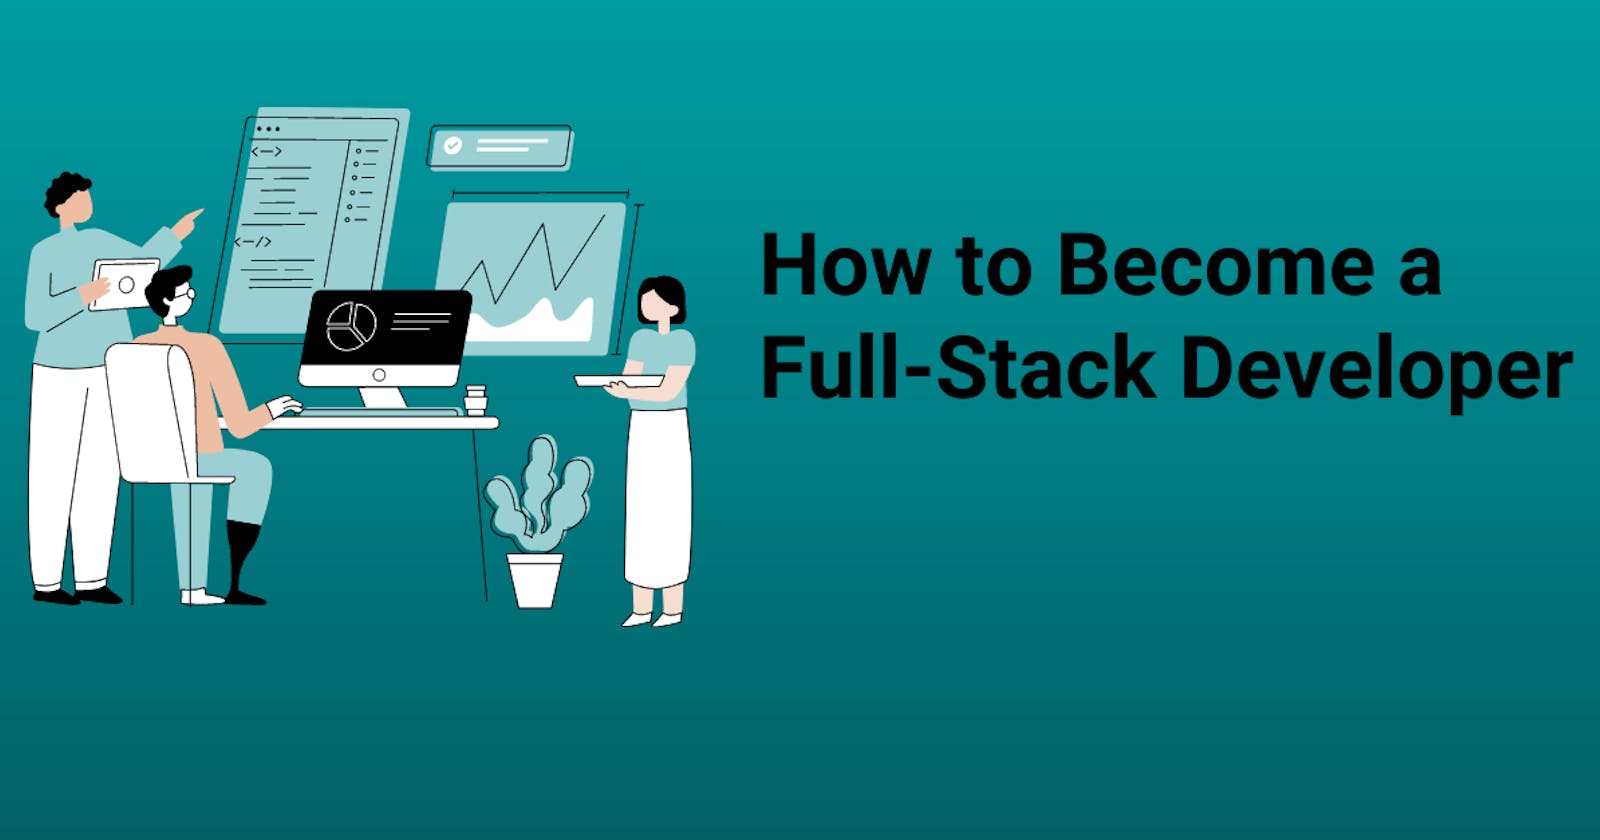 How to Become a Full-Stack Developer